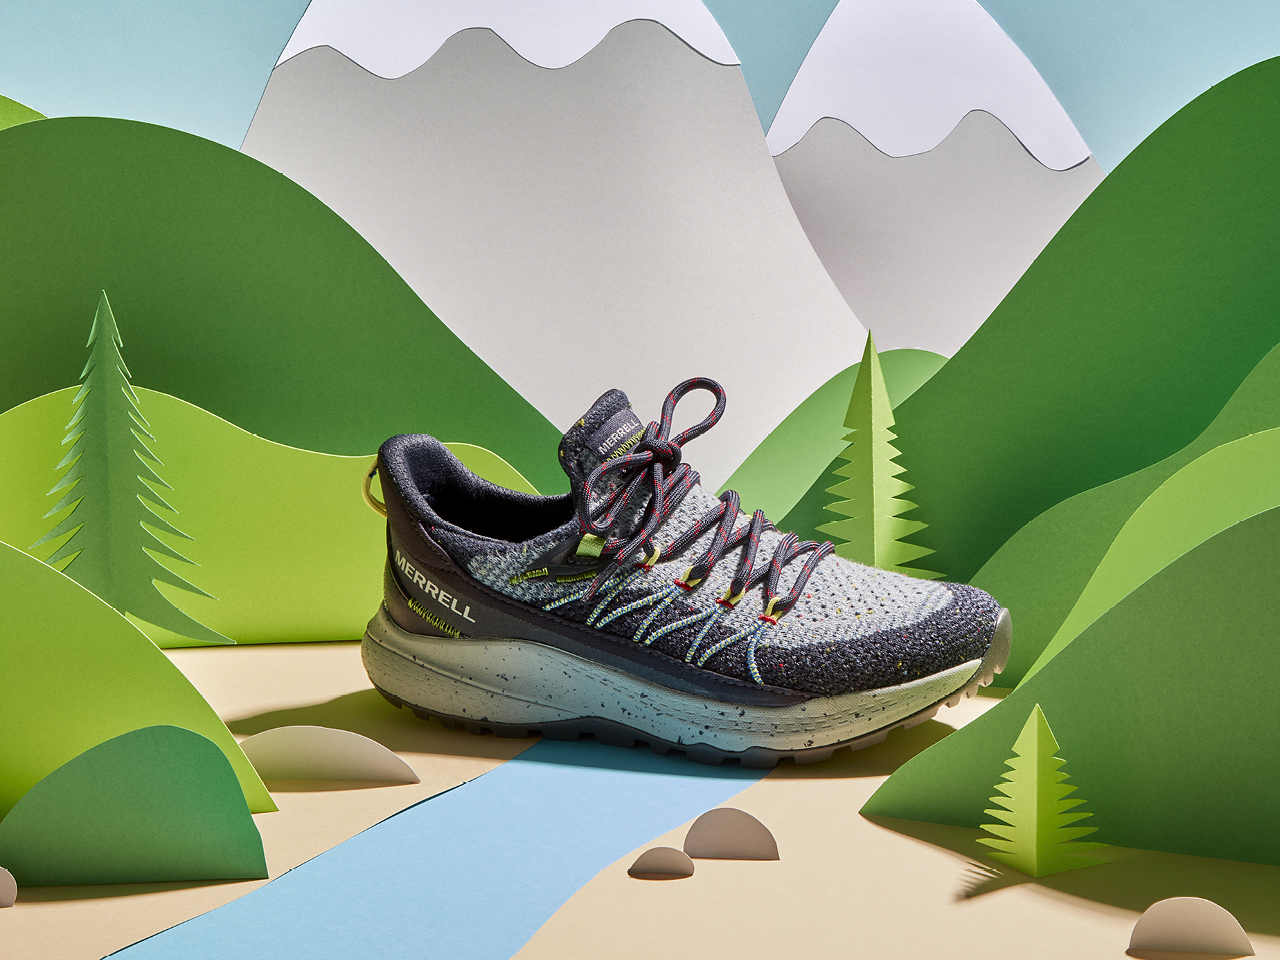 A photo of a grey hiking shoe sitting in a paper forest